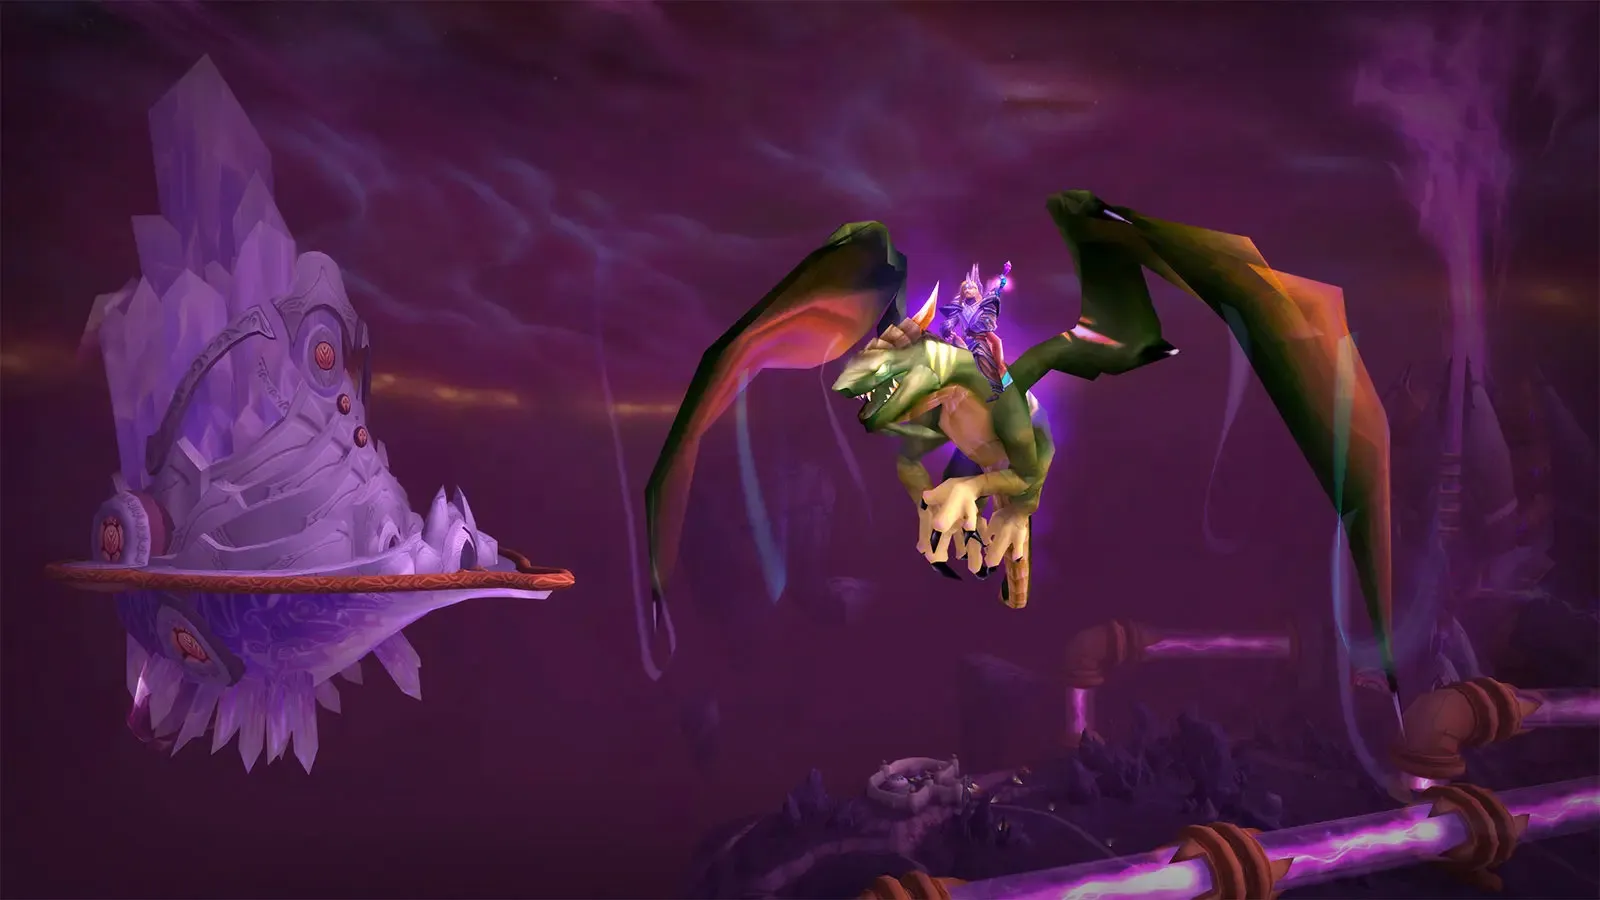 Flying Mount Trainer Location WoW TBC - Alliance and Horde 